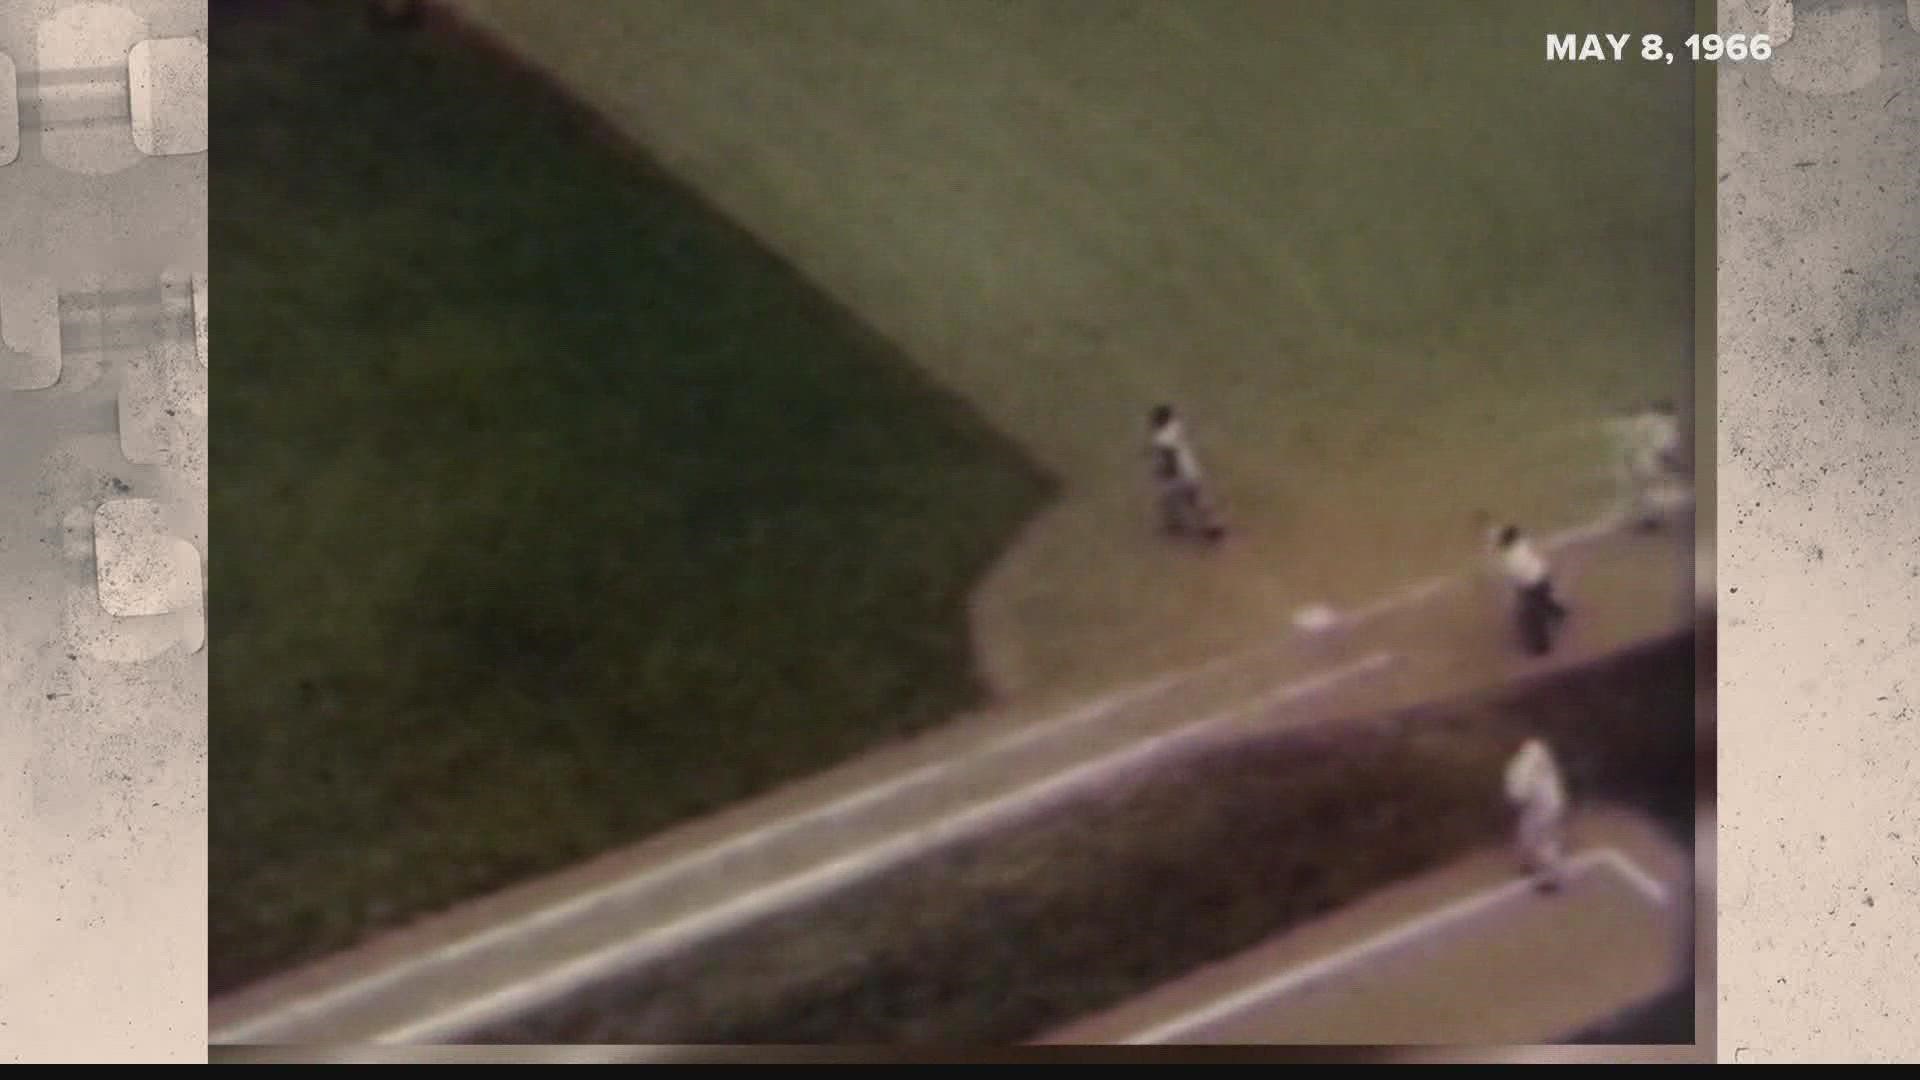 This week's Vintage KSDK goes back 56 years. On May 8, 1966, the Cardinals played their last game at Sportsman's Park.